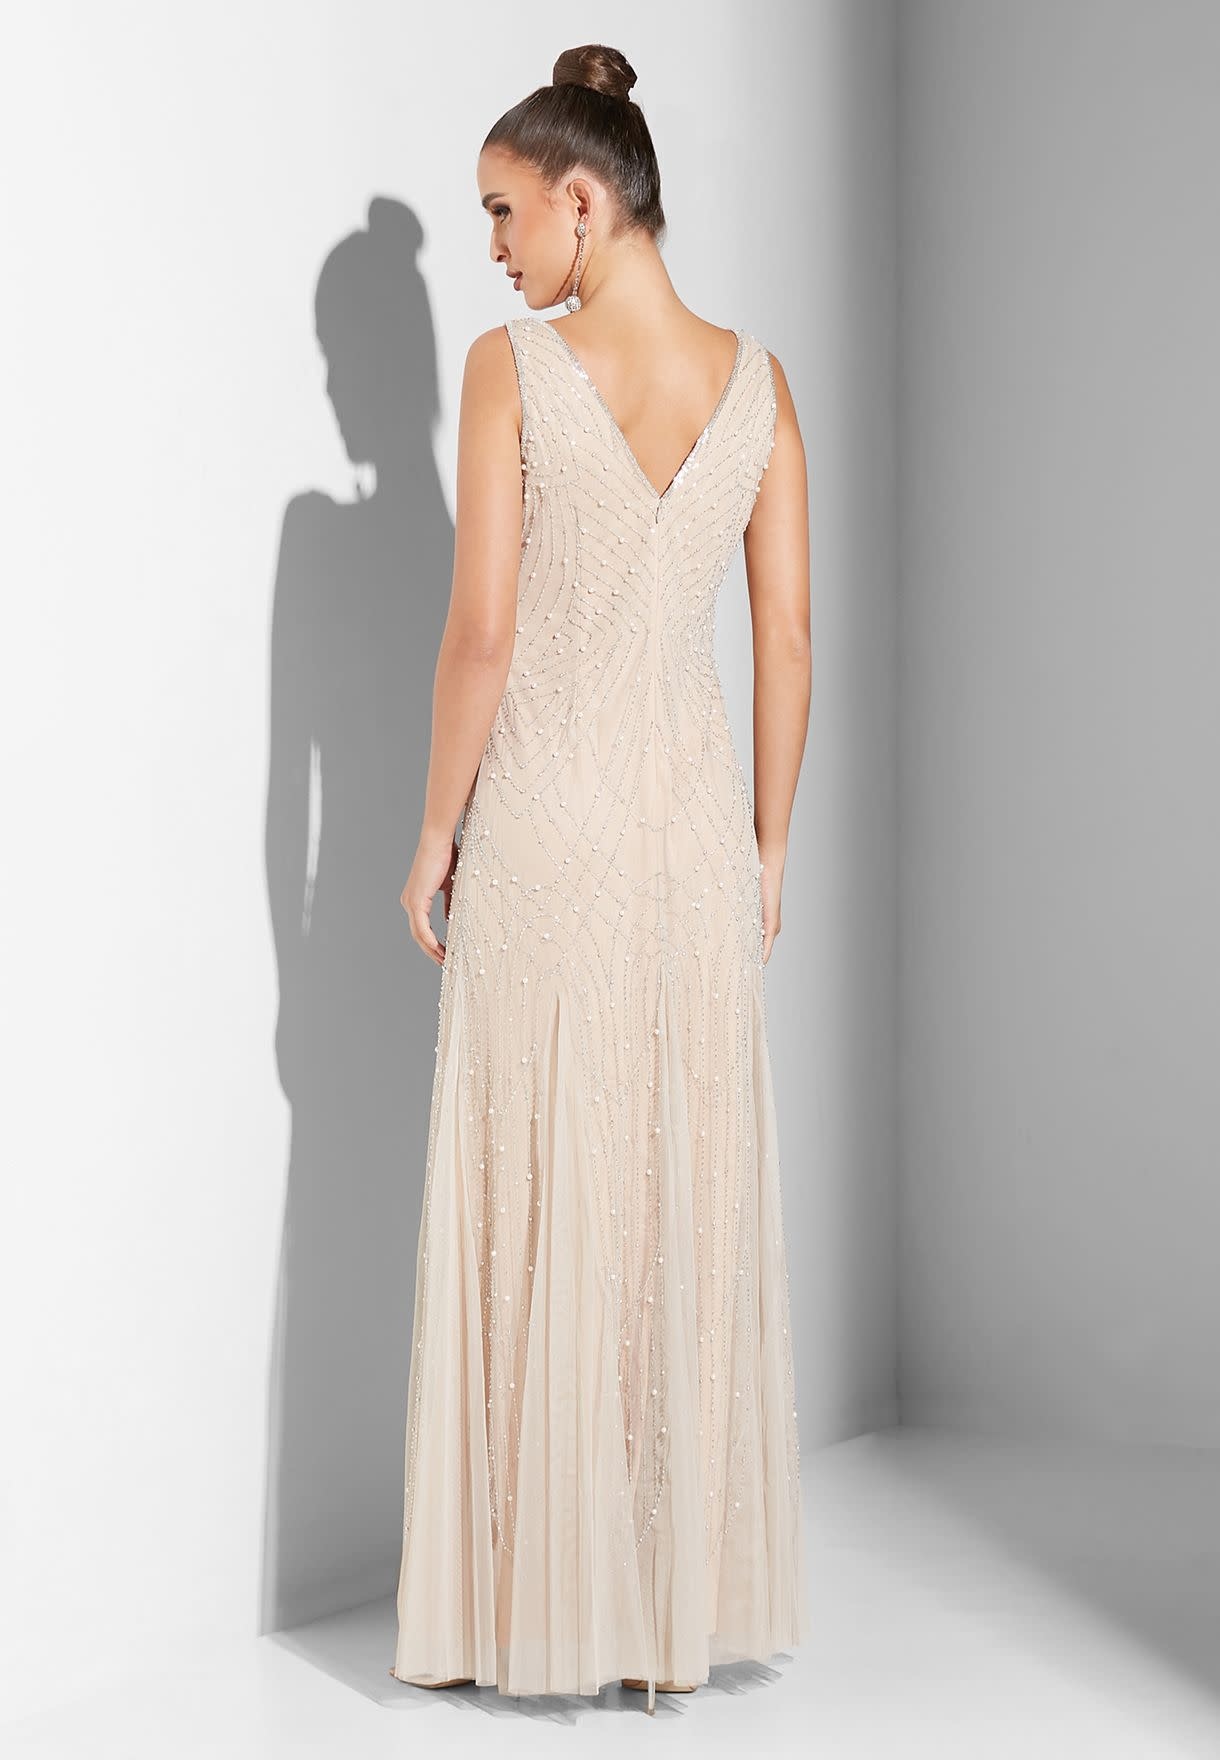 ADRIANNA PAPELL ADRIANNA PAPELL BEADED HALTER GODET GOWN DRESSES